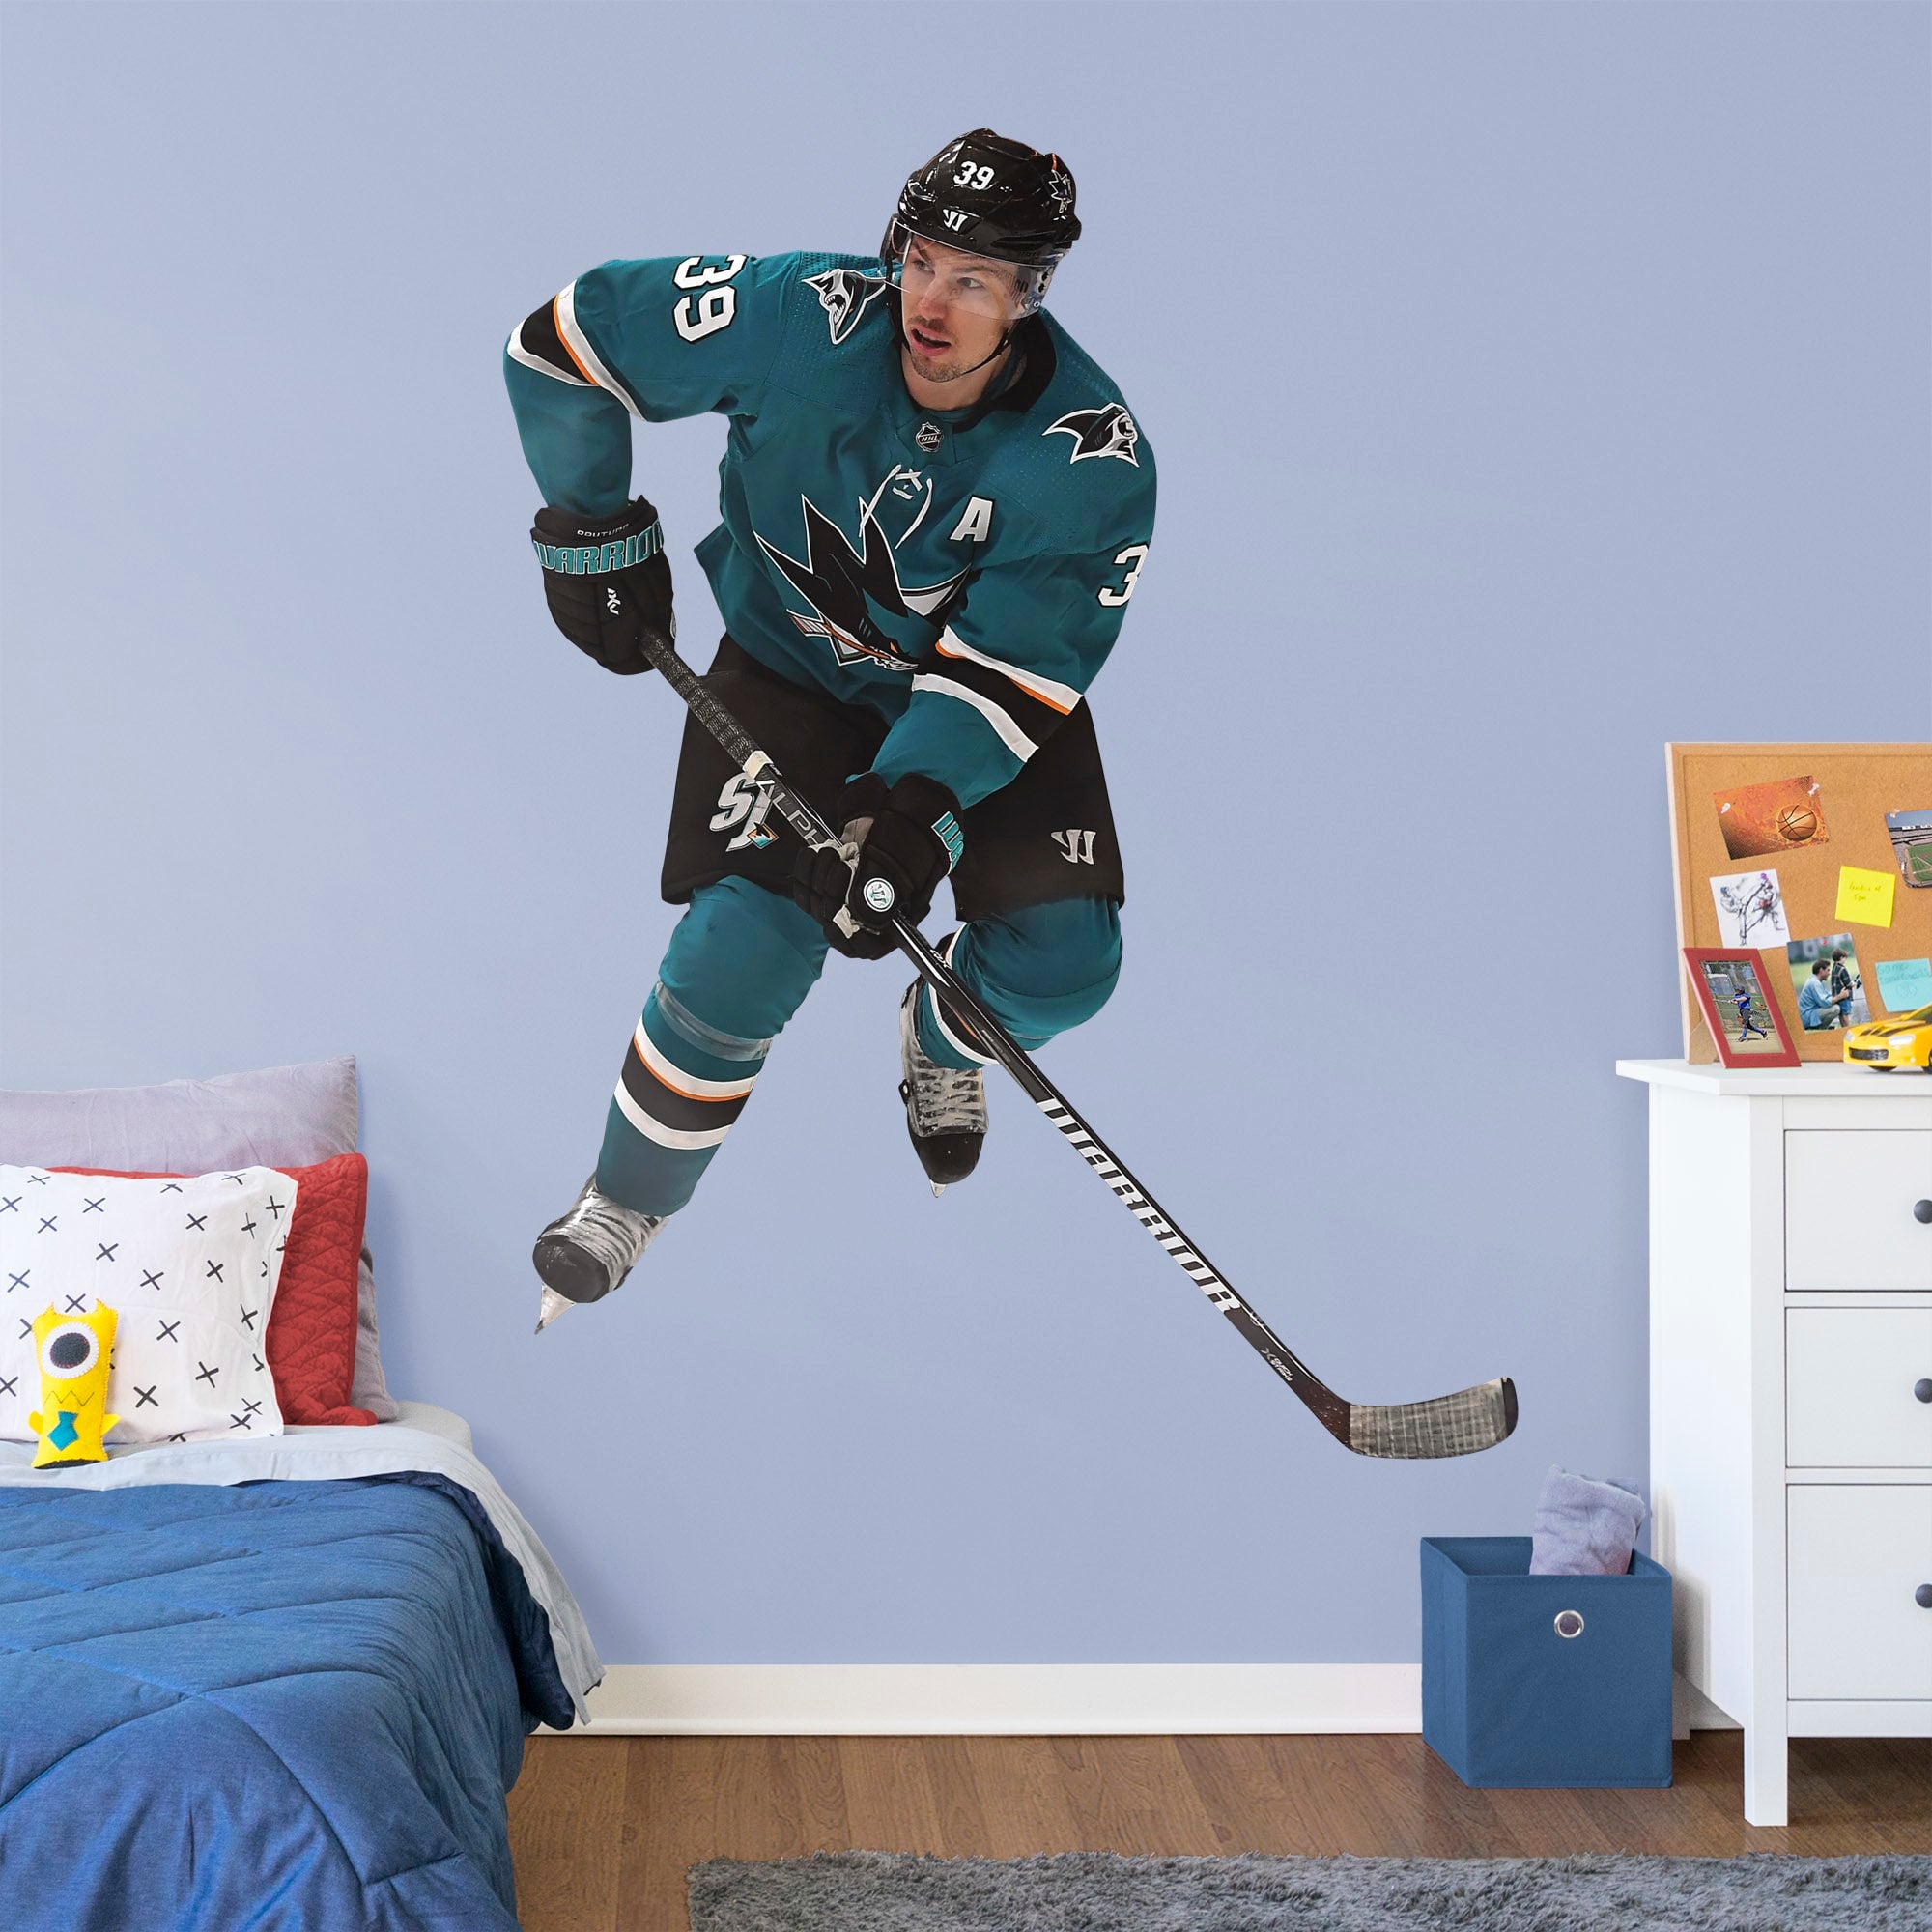 Logan Couture for San Jose Sharks - Officially Licensed NHL Removable Wall Decal Life-Size Athlete + 2 Decals (62"W x 81"H) by F